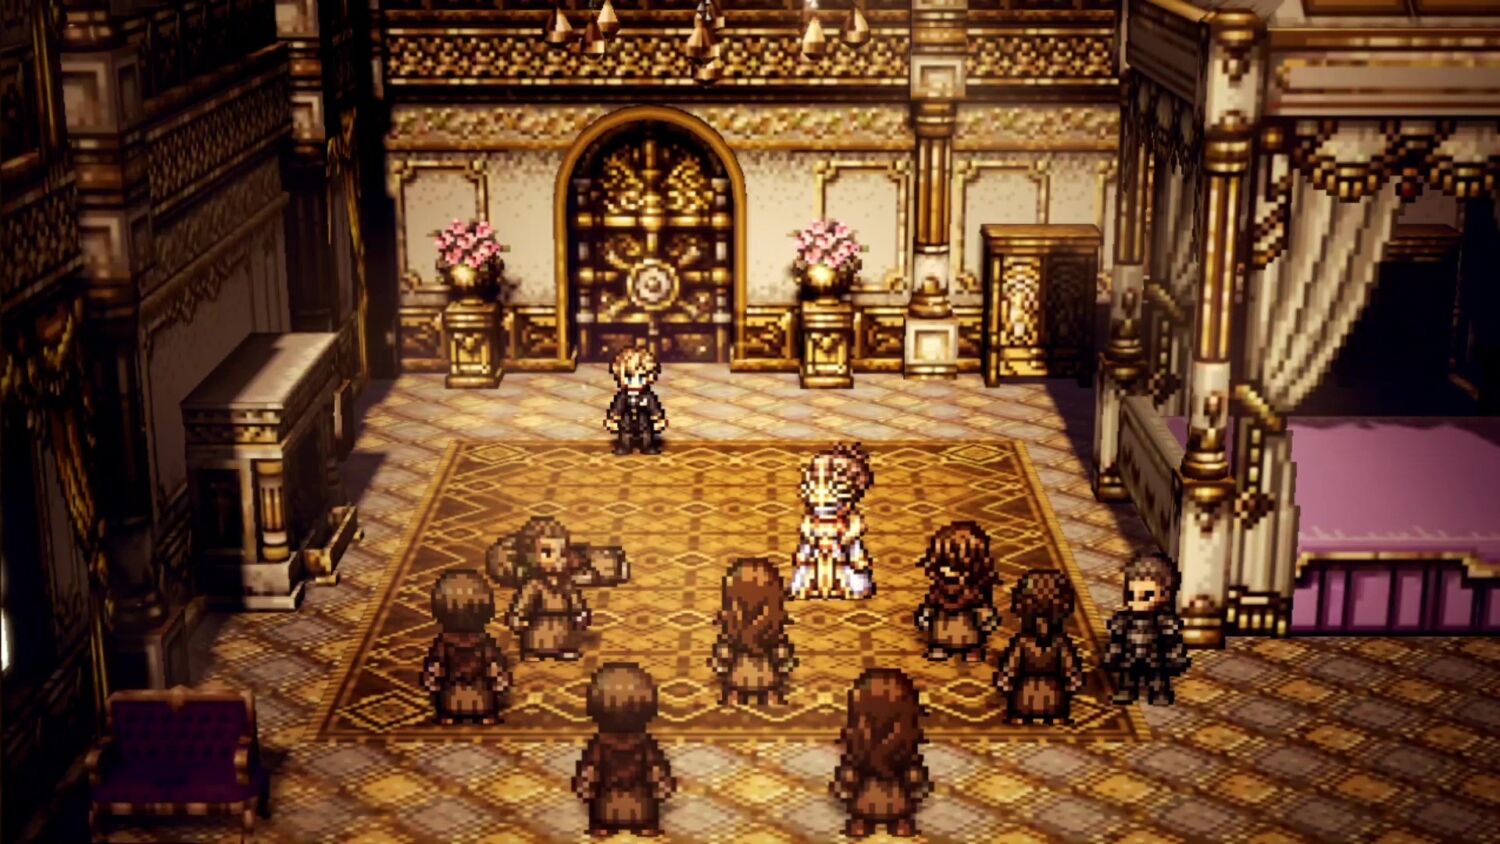 Octopath Traveler: Champions Of The Continent Hold Launch Event